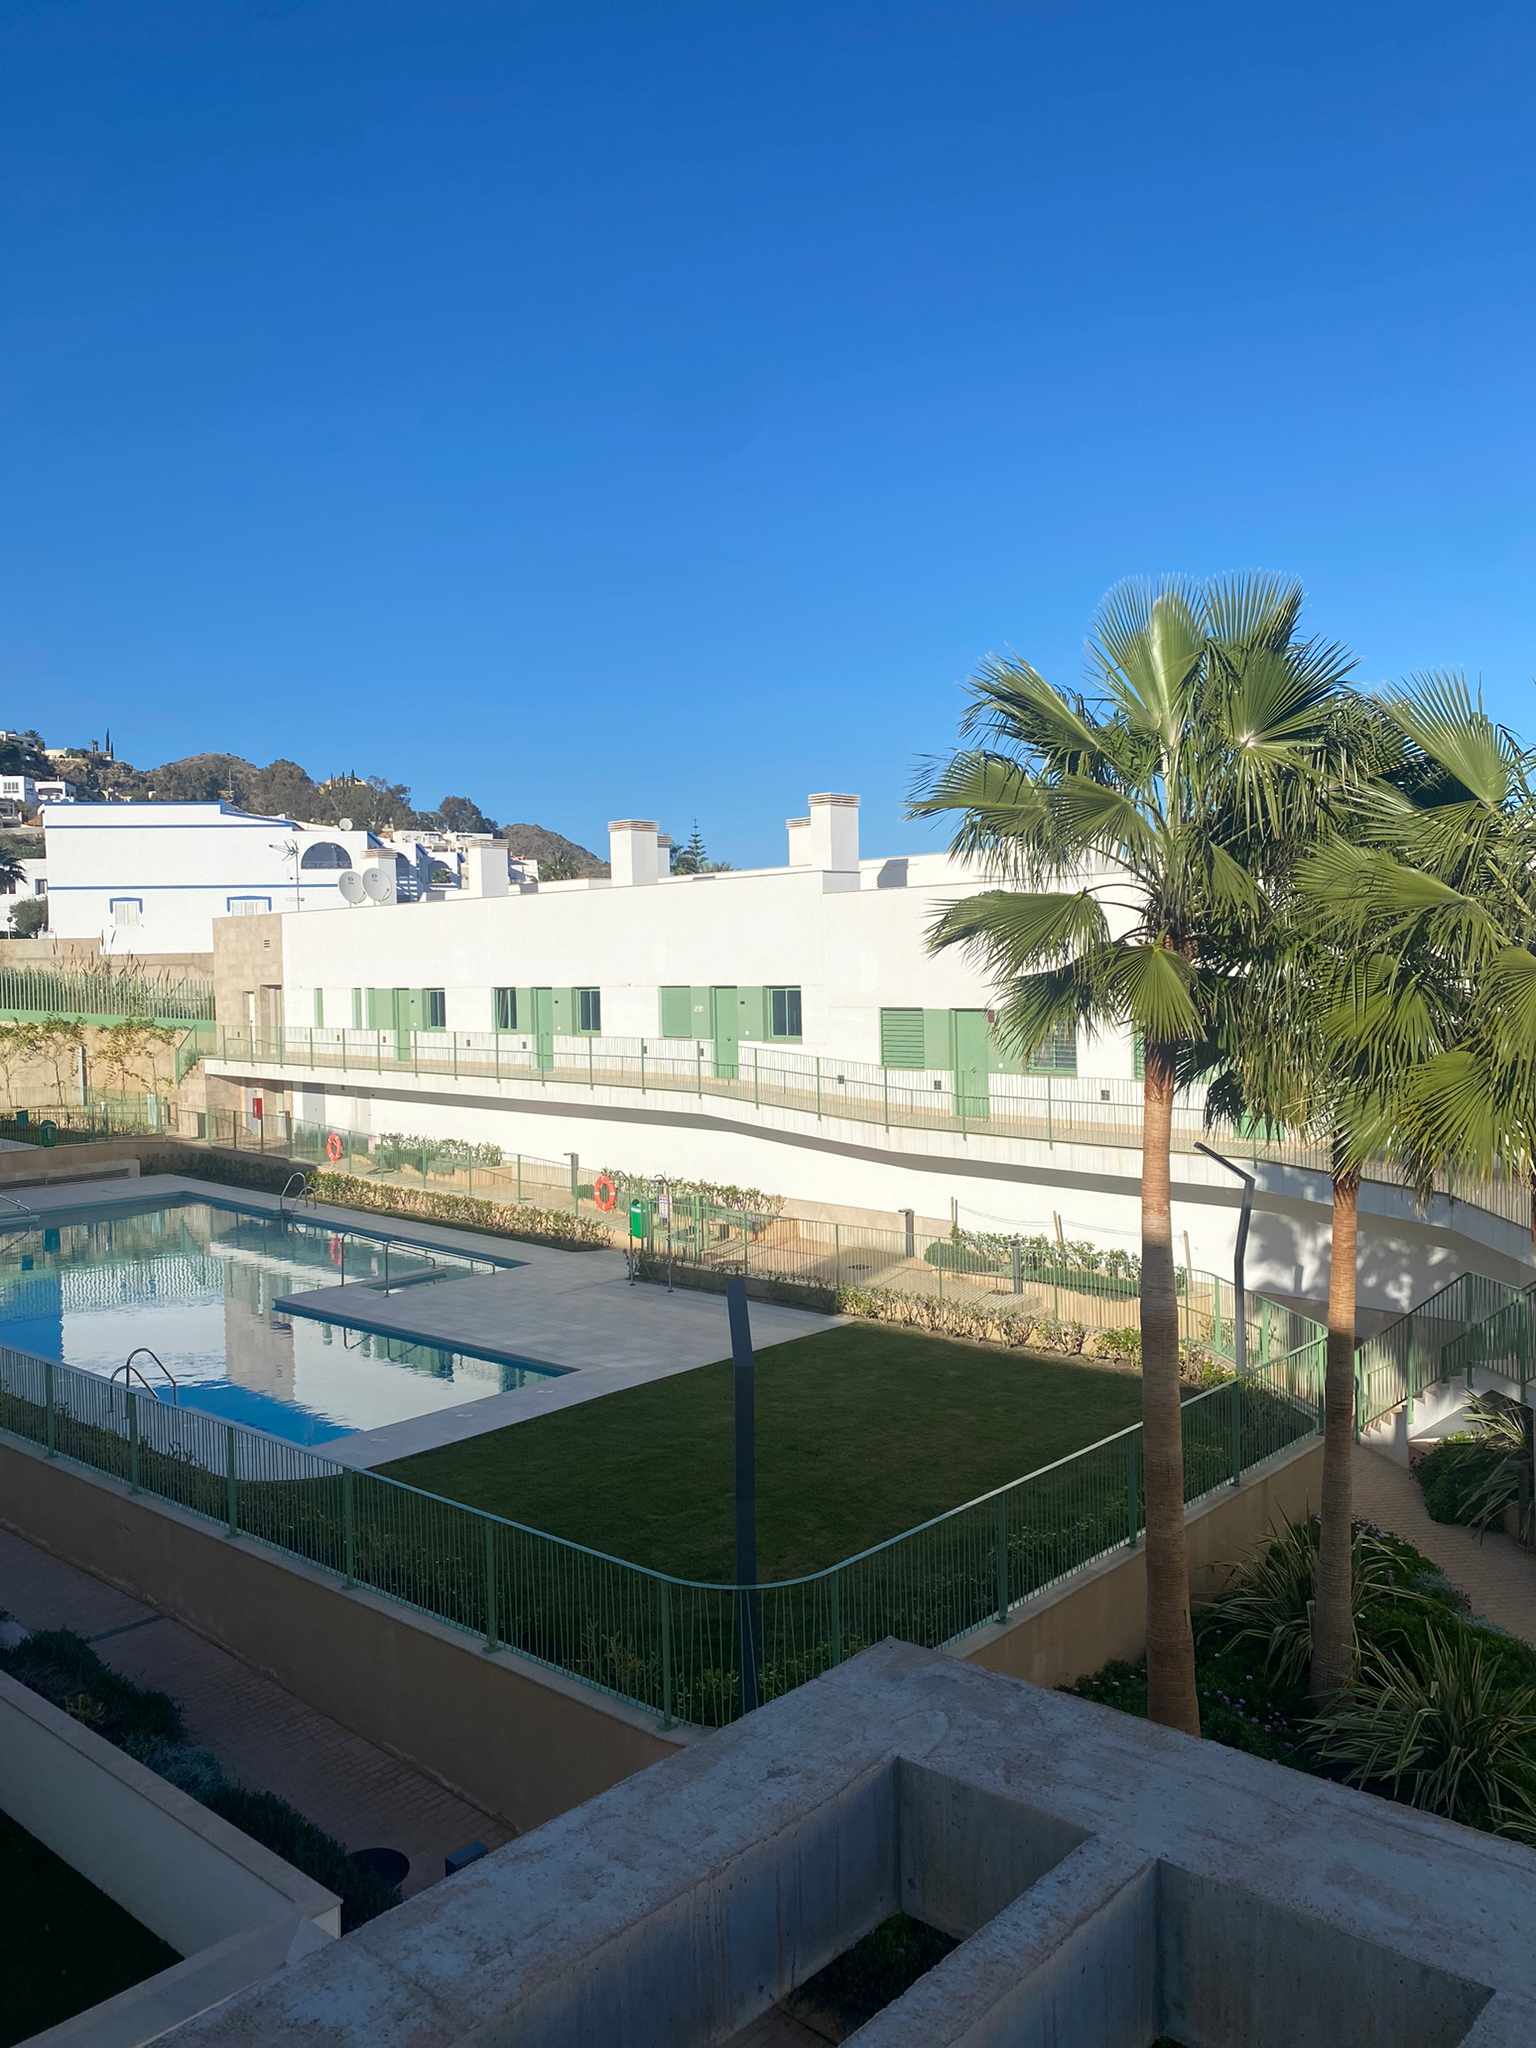 Ideal Apartment for a family holiday El Cantal: Apartment for Rent in Mojácar, Almería